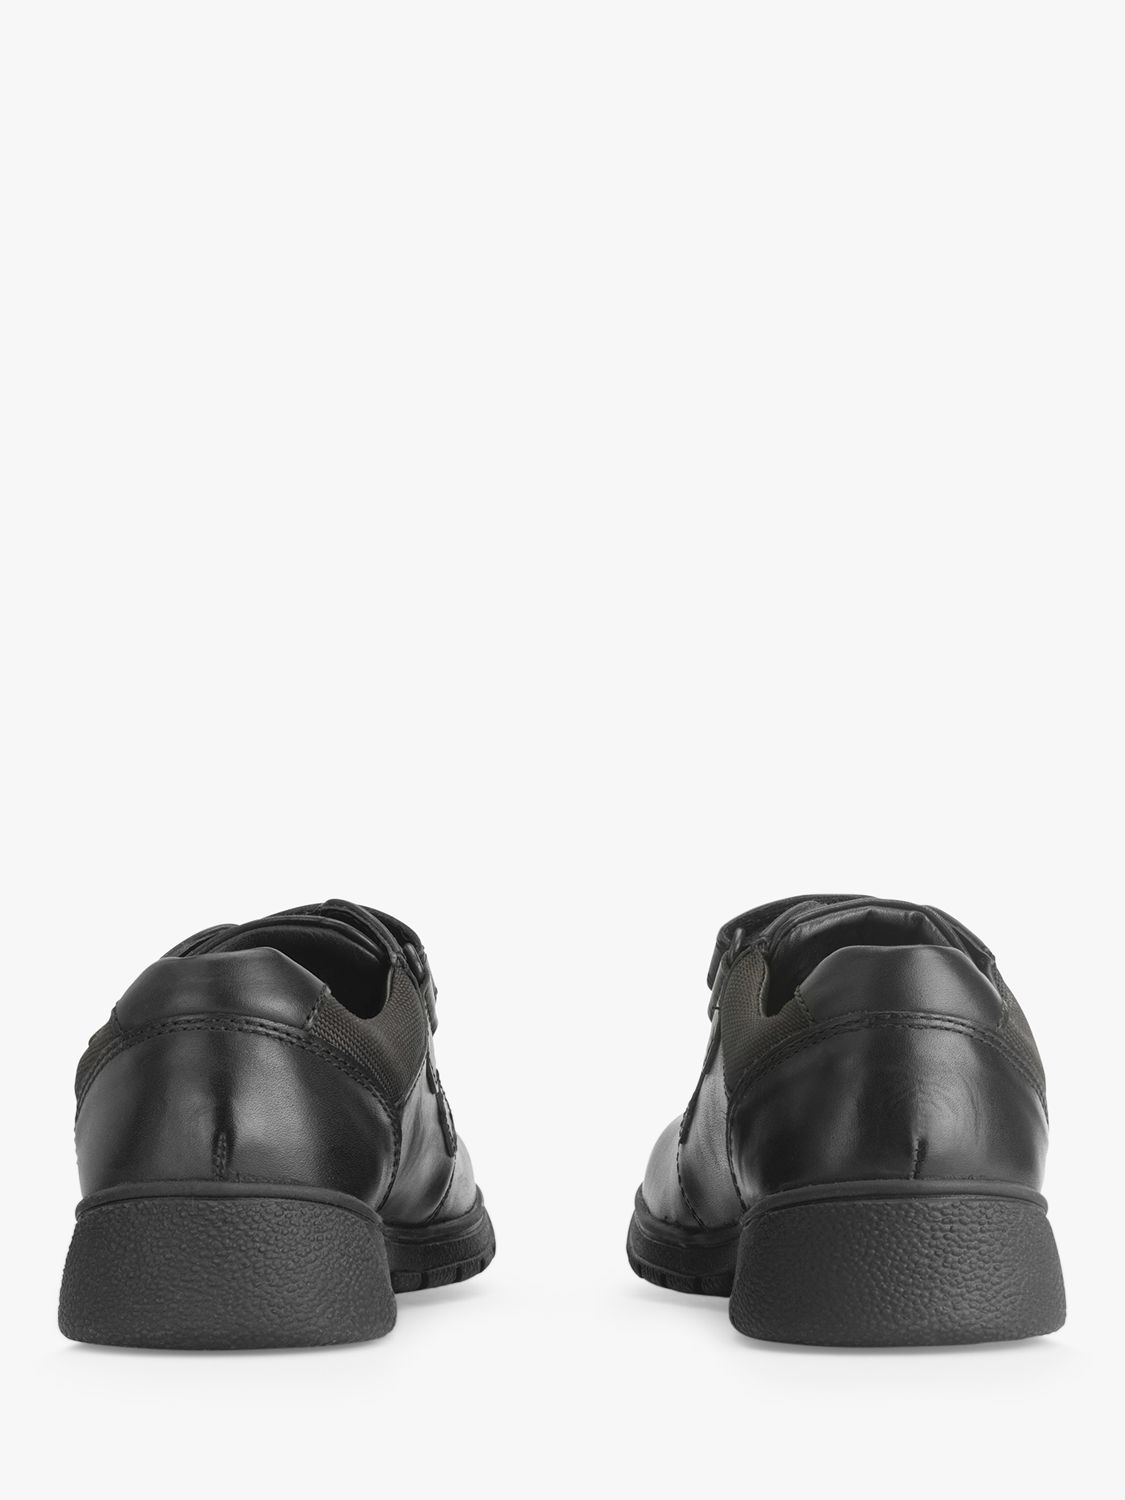 Buy Simply by Start-Rite Kids' Subject Leather School Shoes Online at johnlewis.com